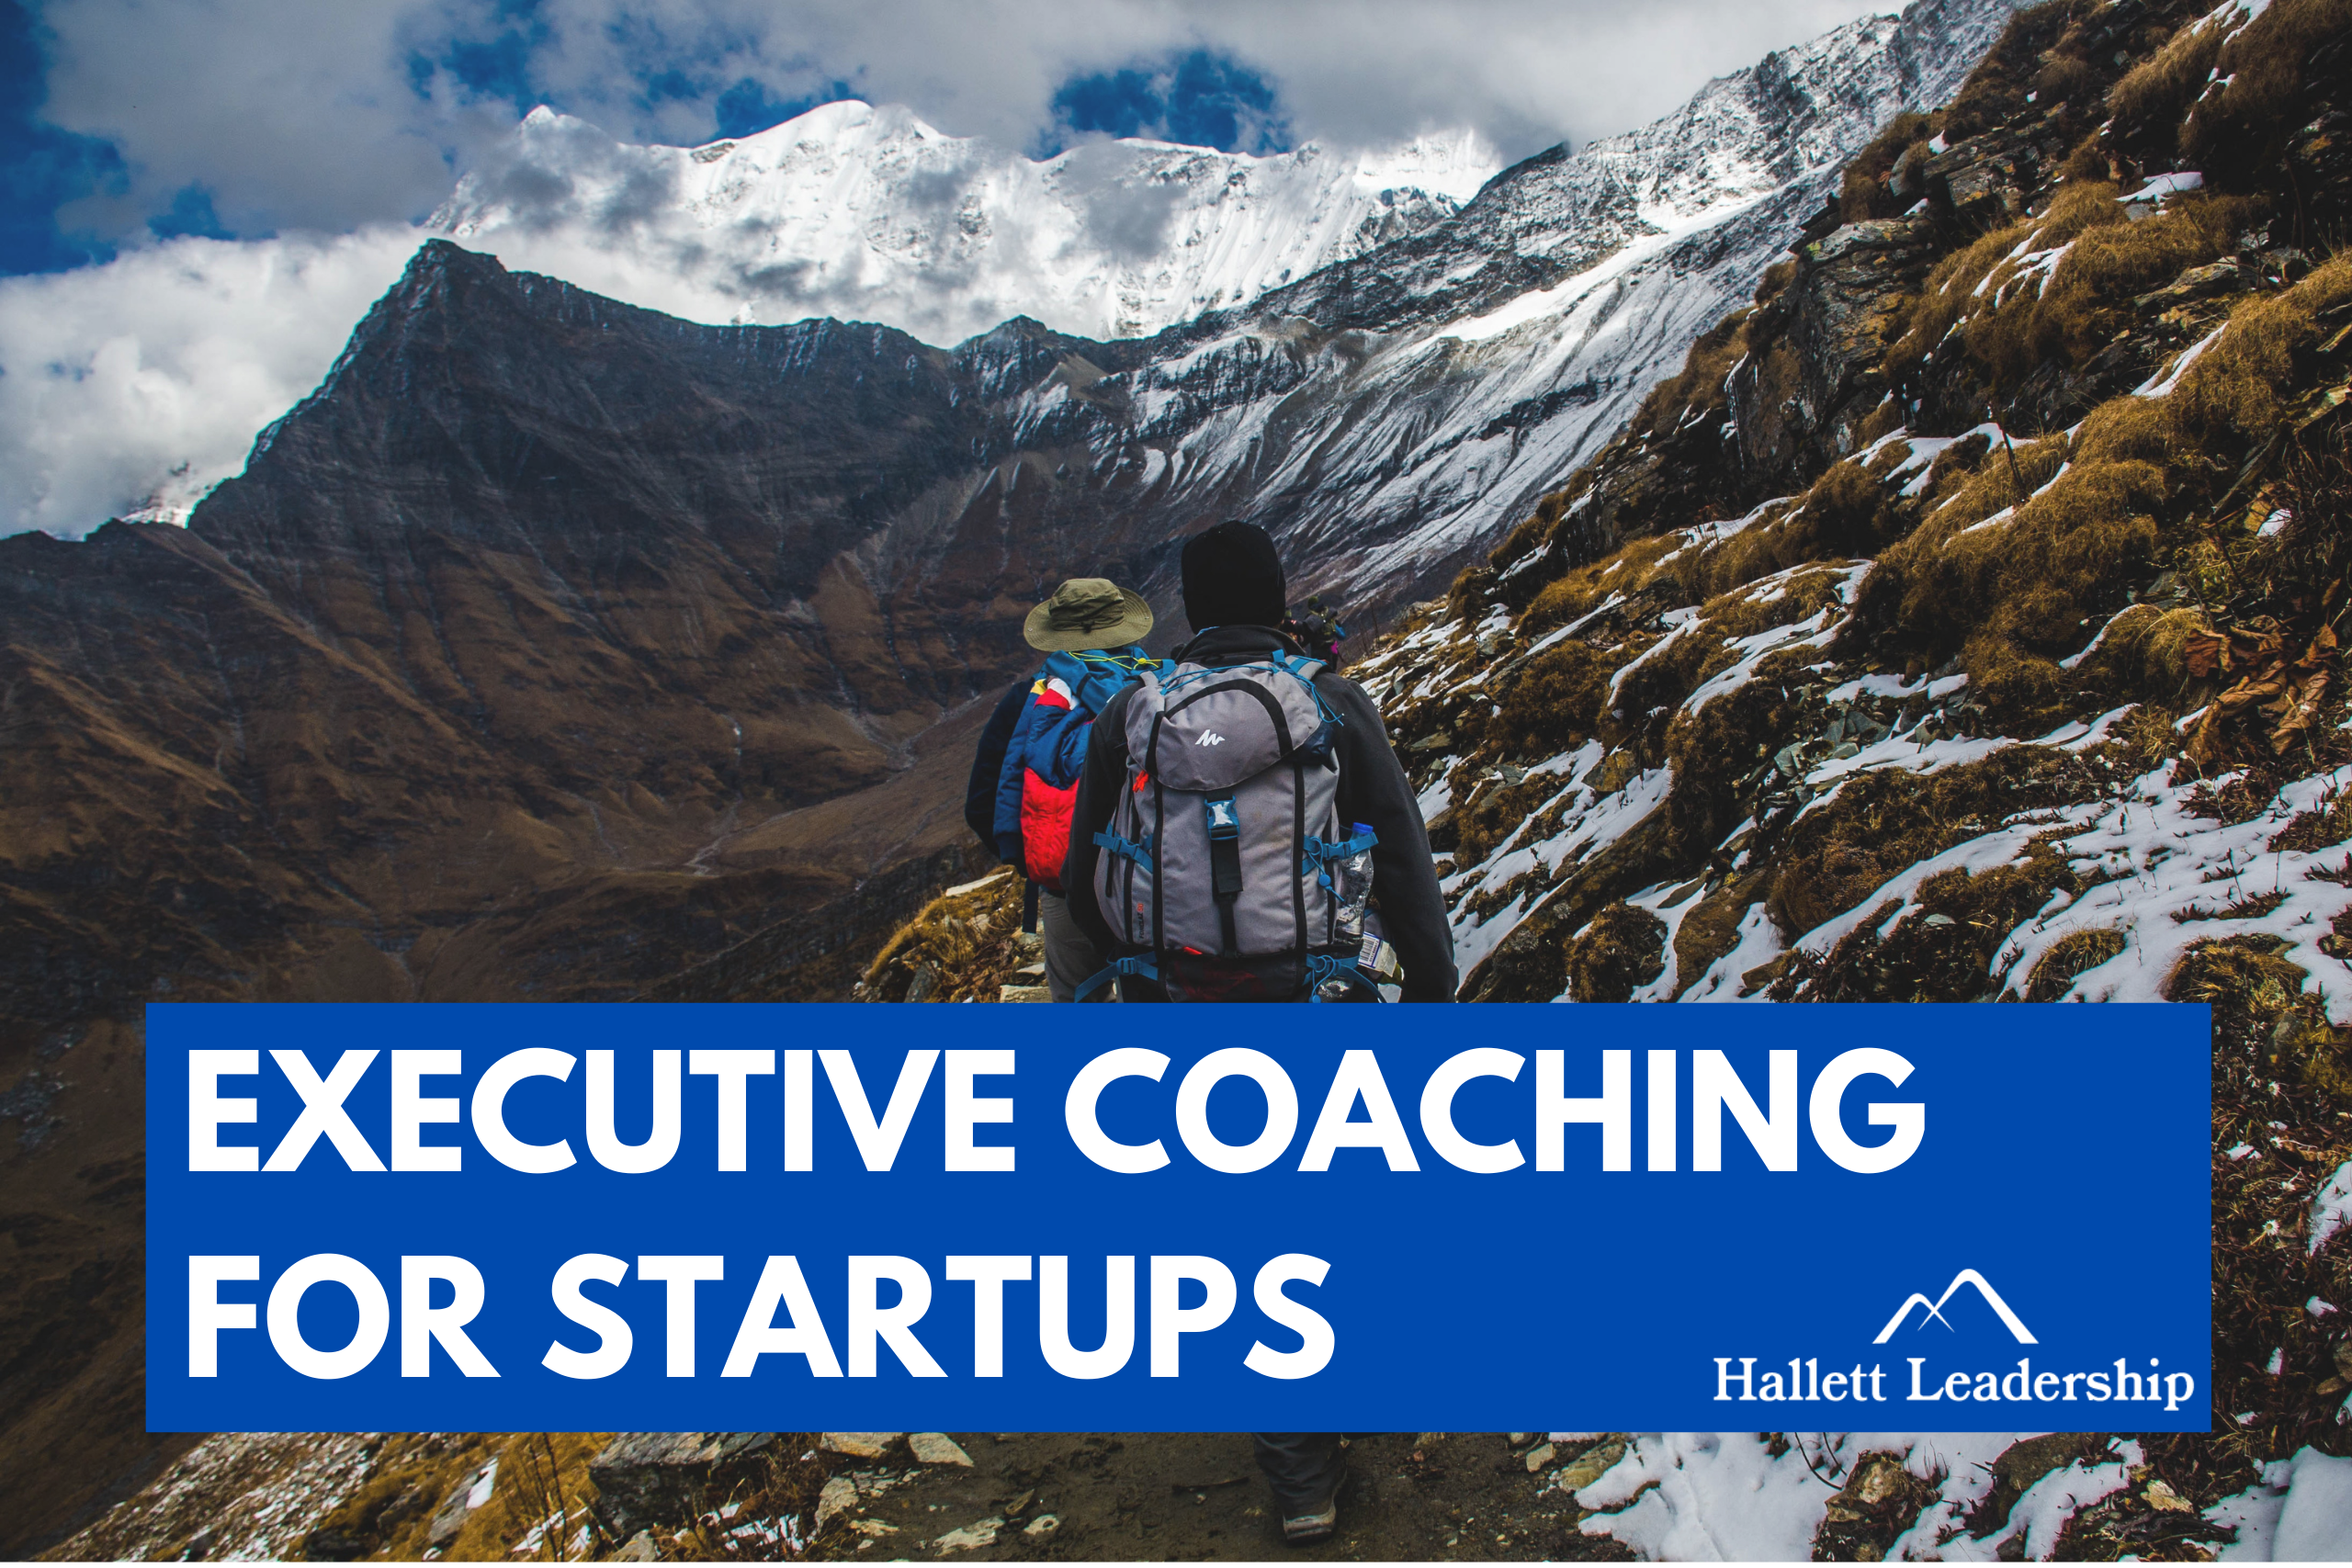 Executive Coaching for Startups